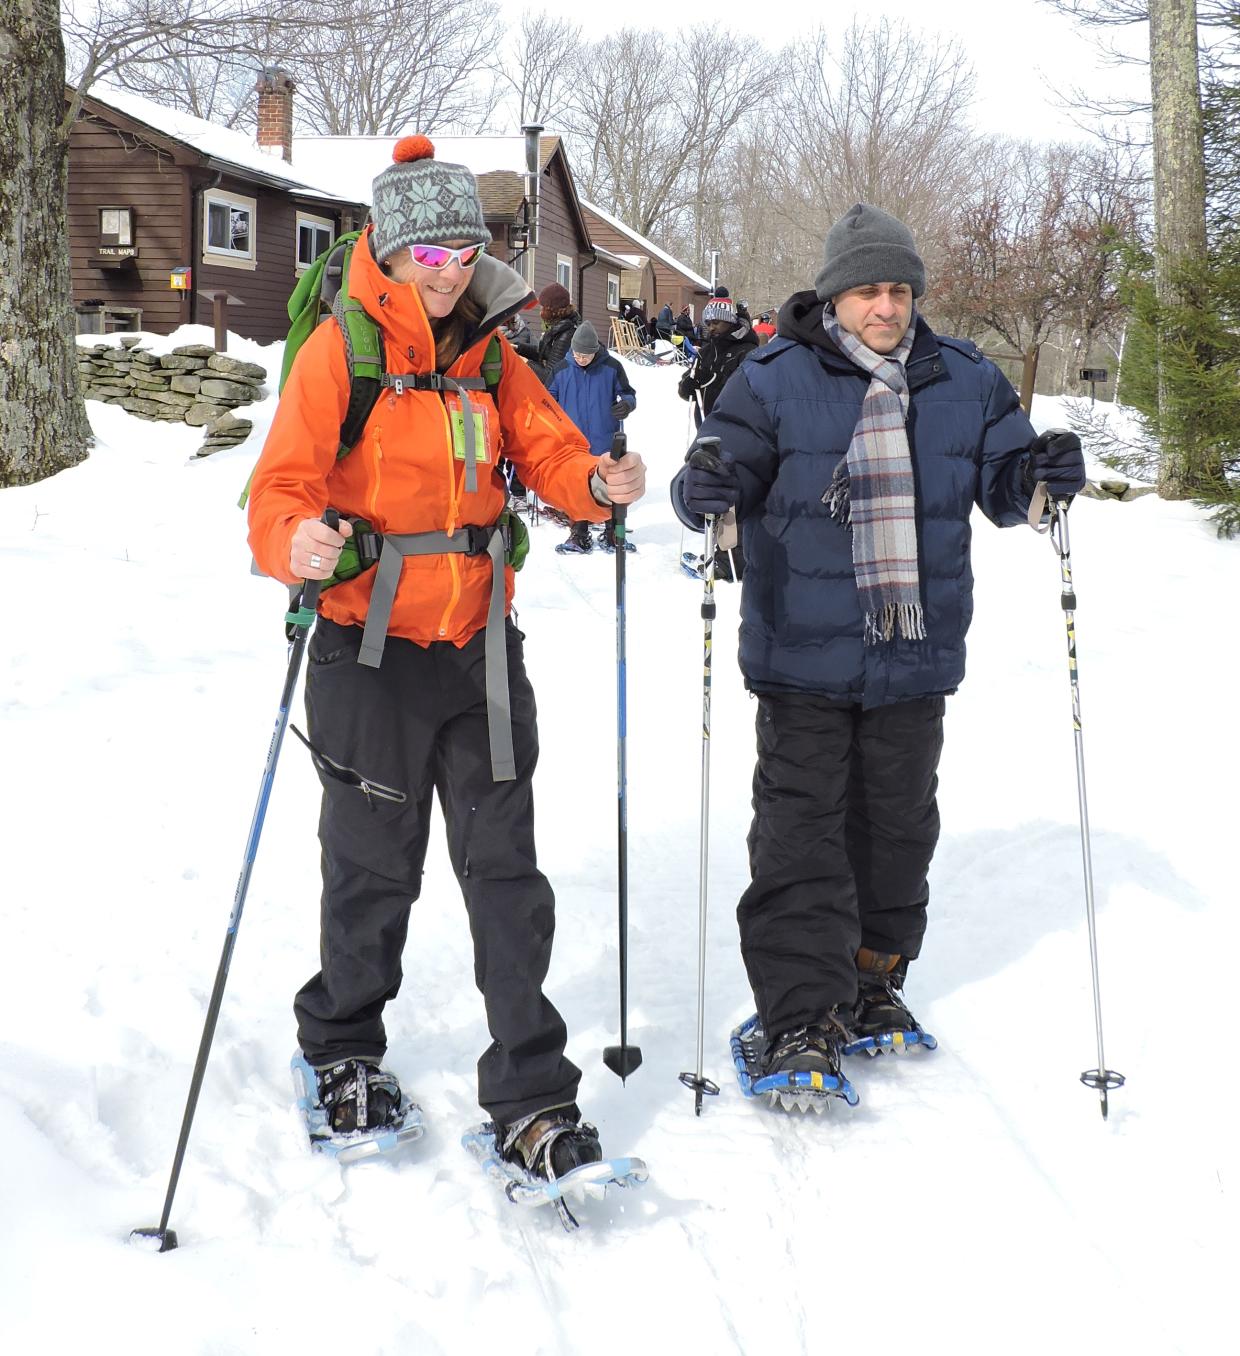 A group using snow shoes and ski poles sets off down a snowy hill.